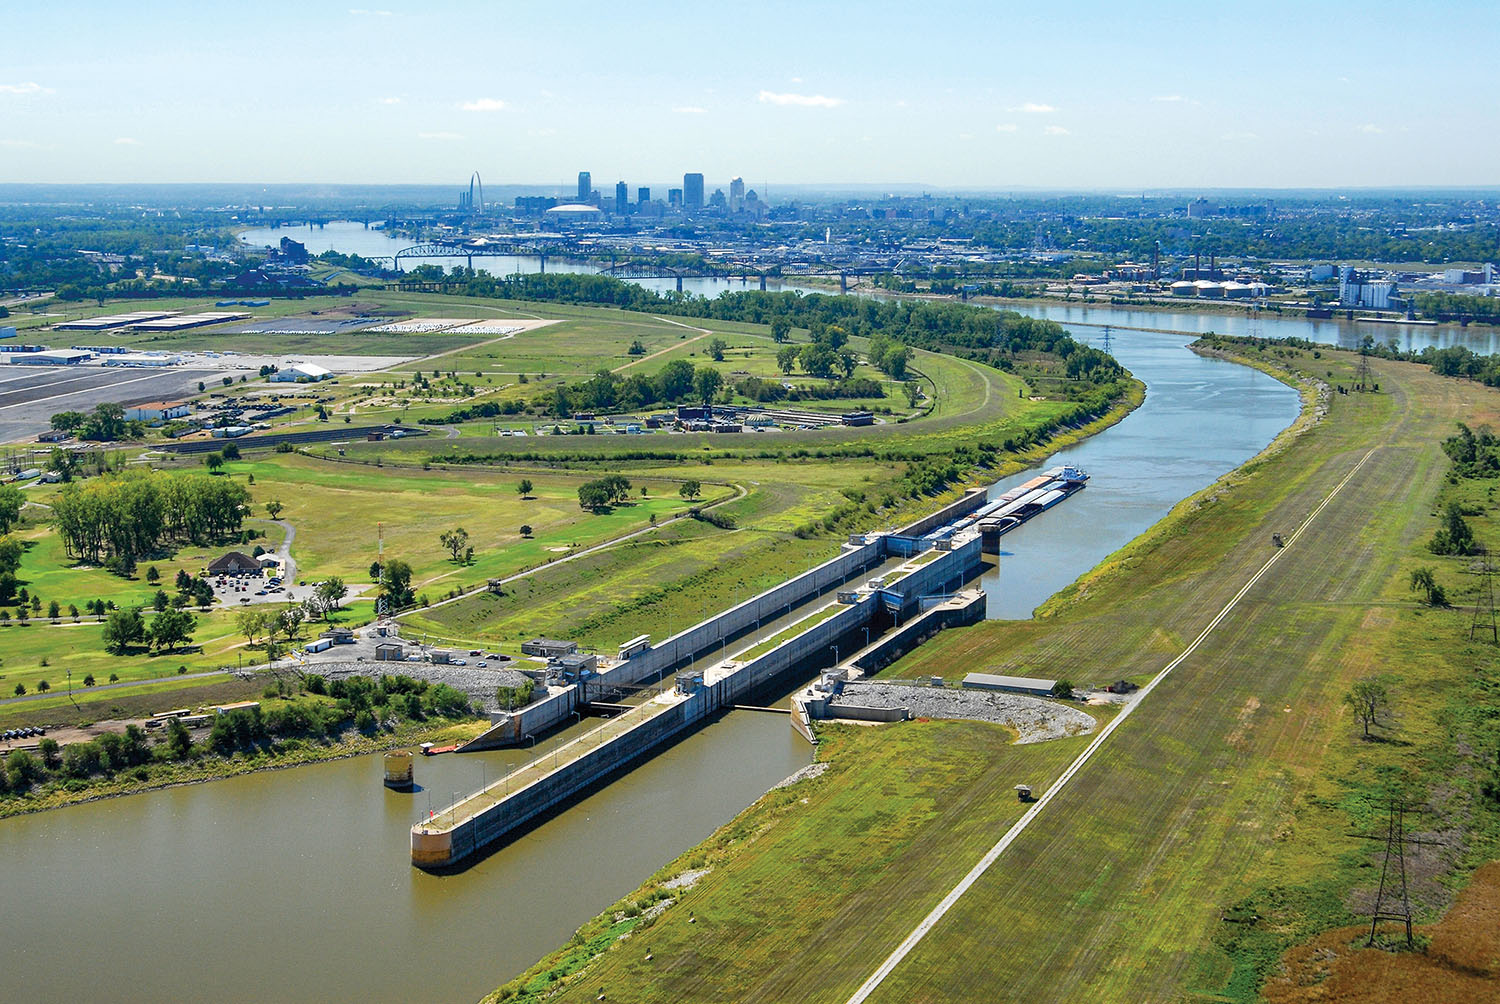 Locks 27 near St. Louis. (Photo courtesy of St. Louis Engineer District)